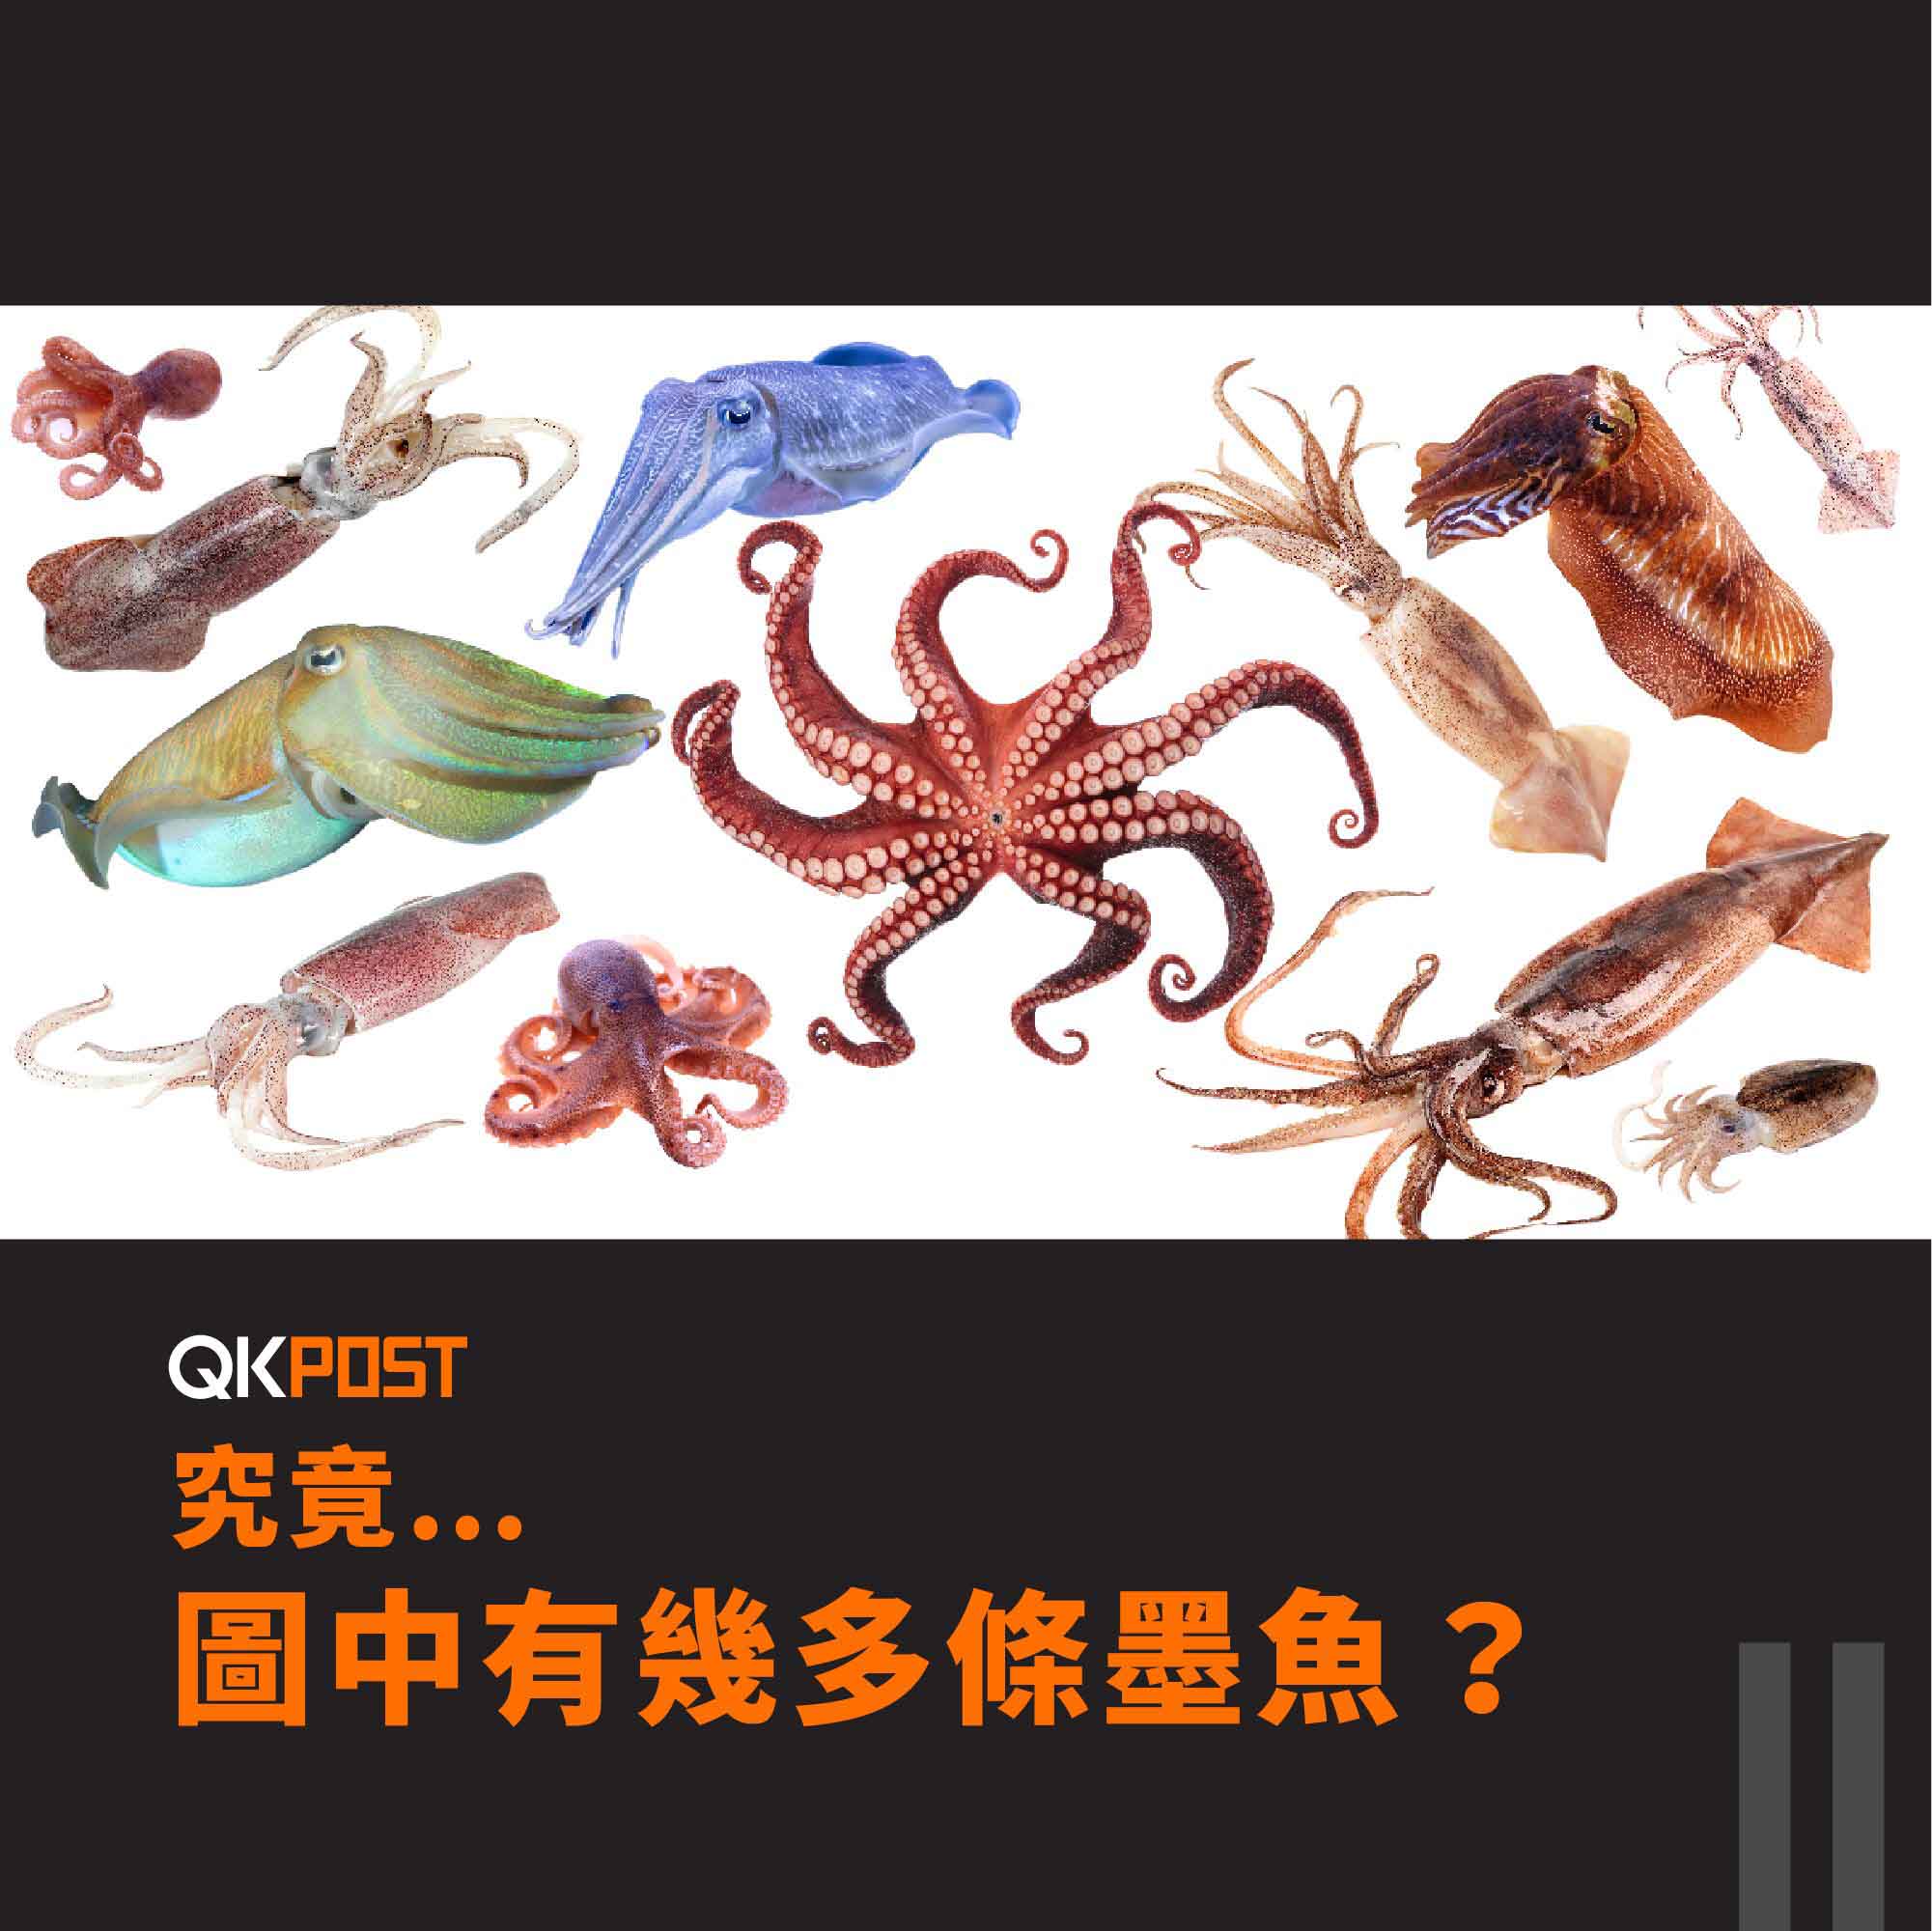 QK Lifestyle: How many cuttlefish are there in the picture?